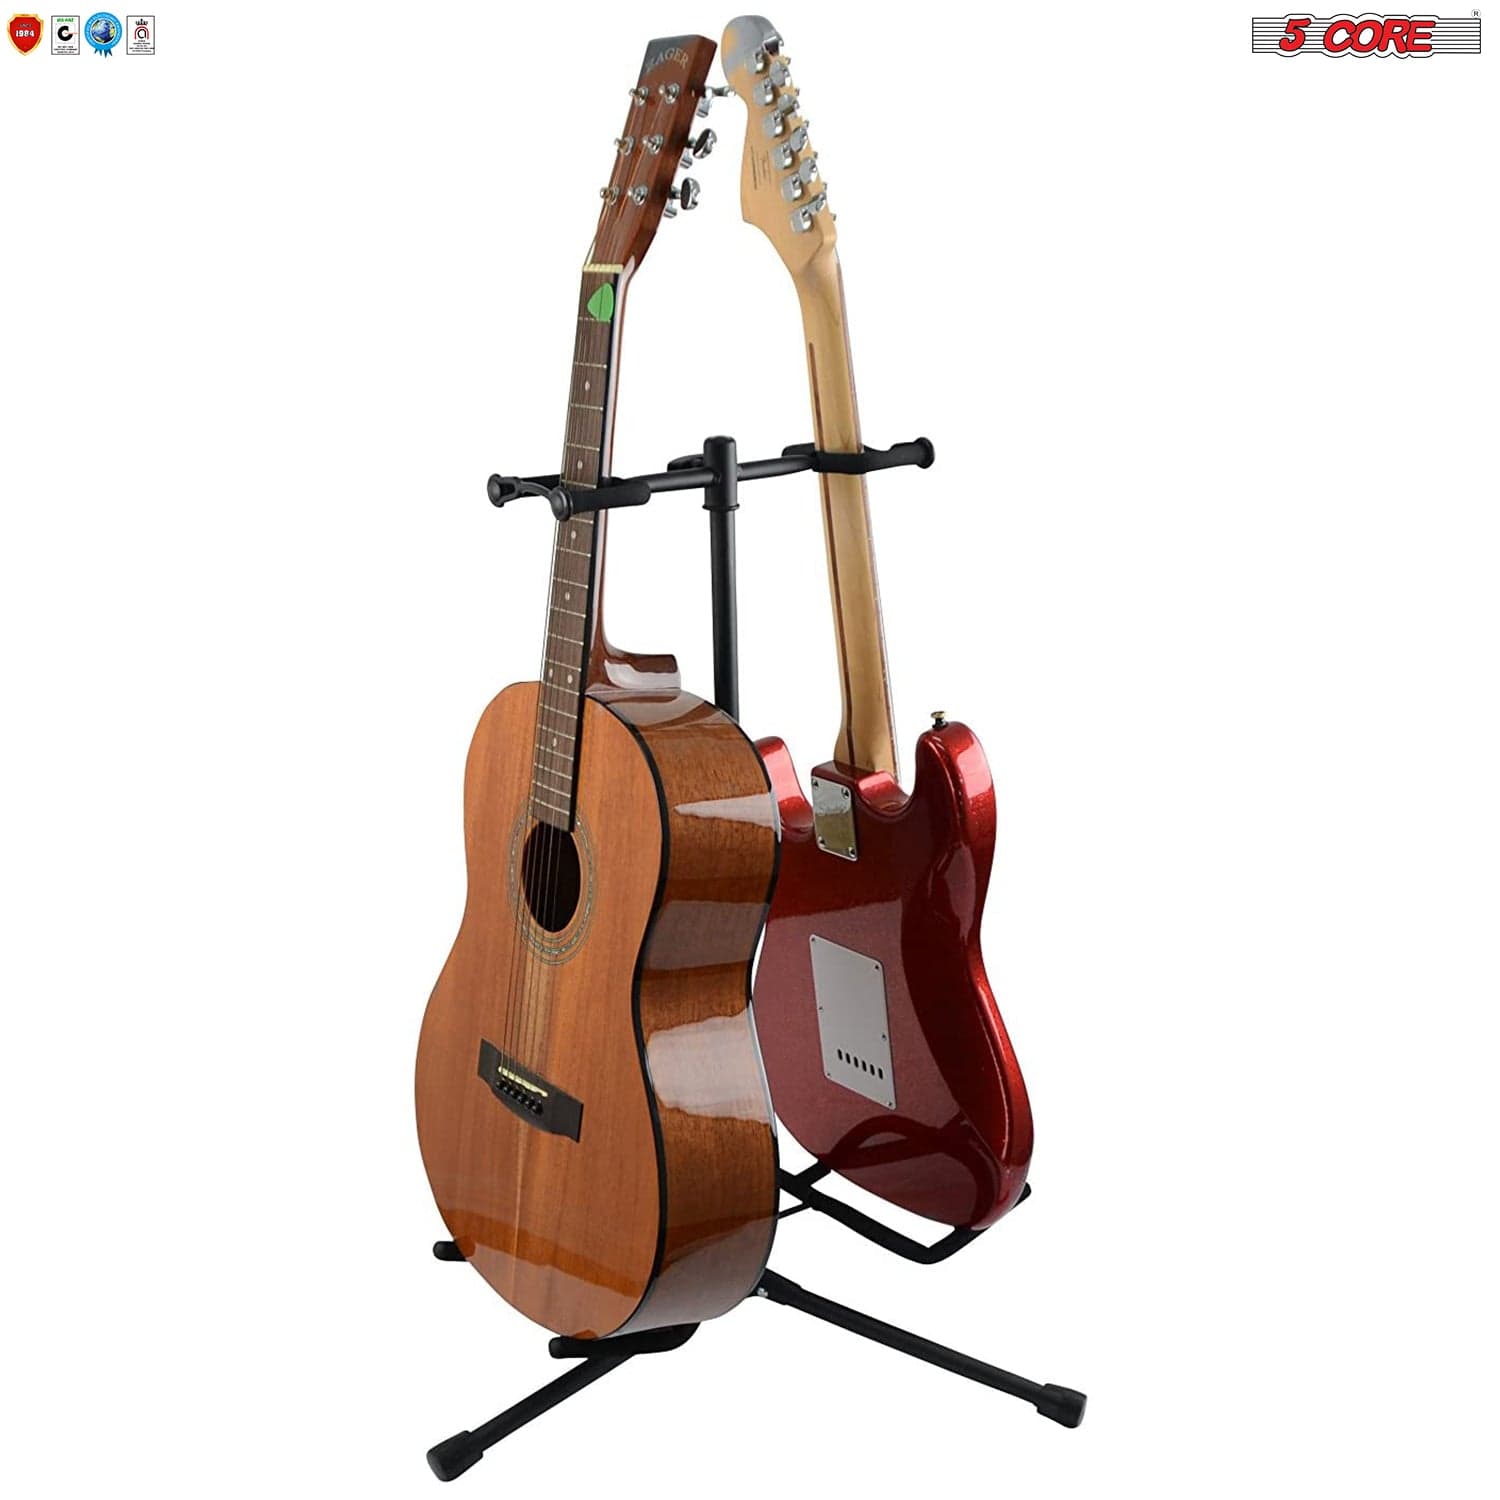 Guitar Stands 5Core Metal Guitar Stand for Acoustic Classic Electric Guitar Detachable Musical Instrument Stand (2 Guitar Holders) Breakthrough-Guitar-Gifts